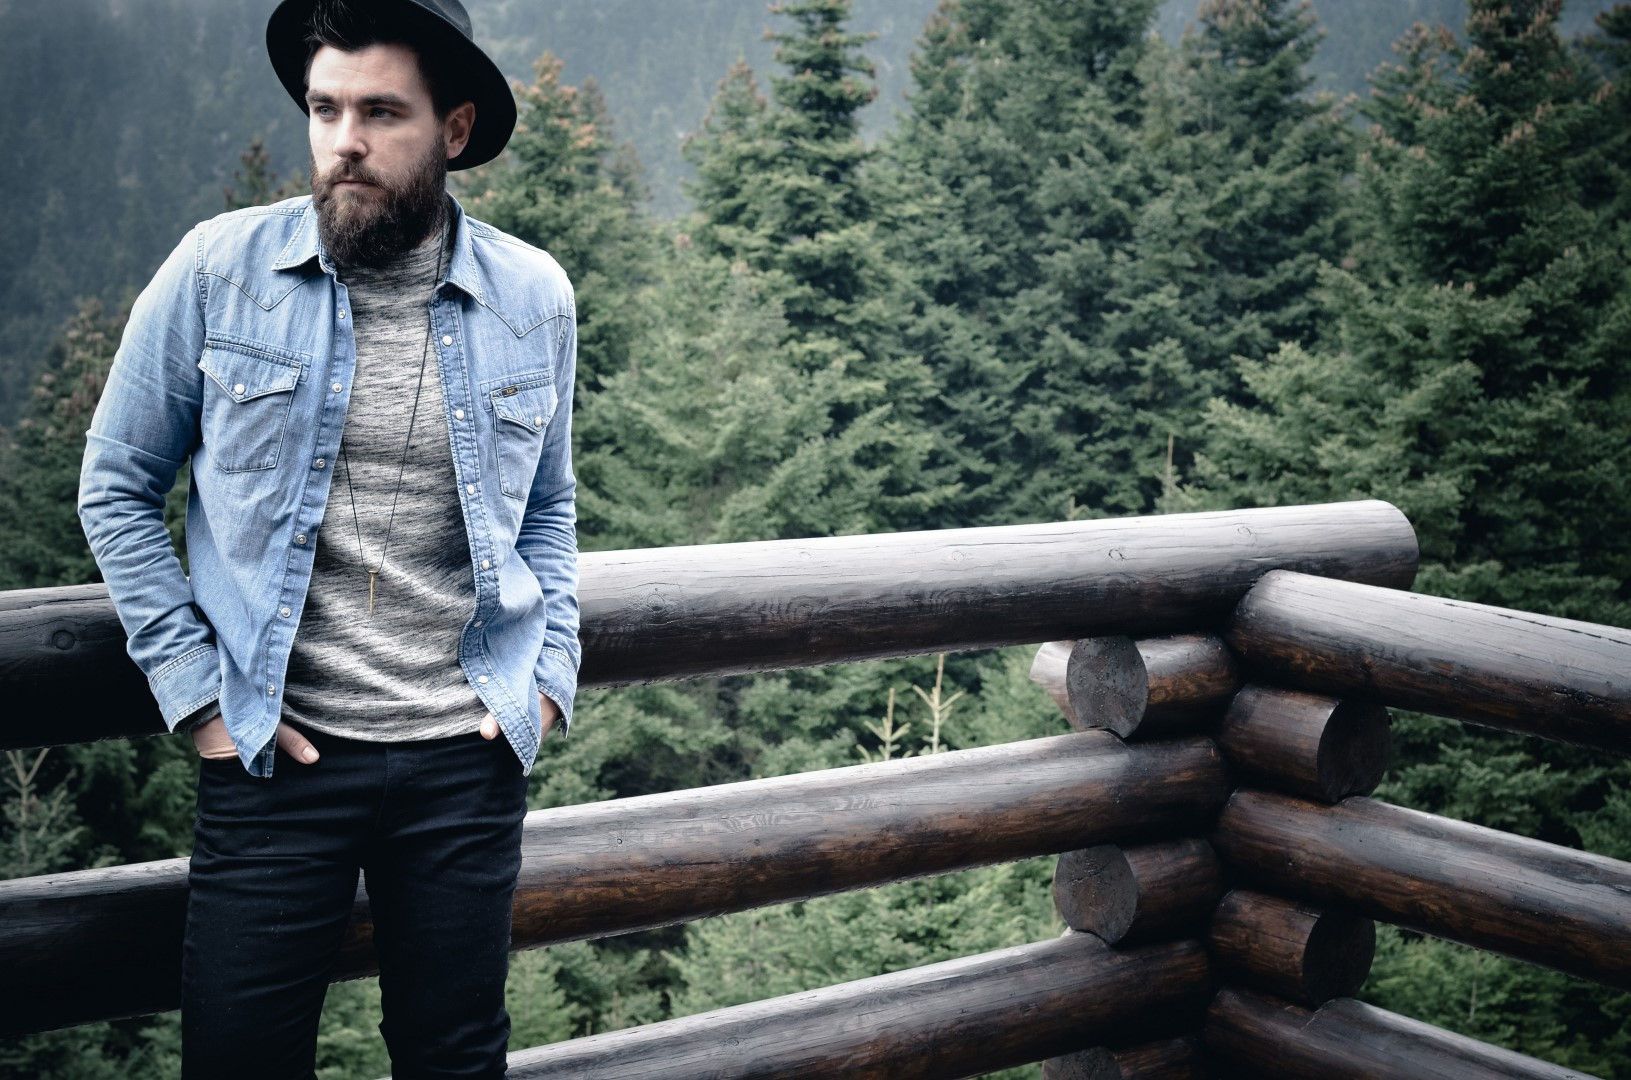 man fashion blogger, street style, trends 2015, fashion blog, mens look, alpine chic, mountain, chalet, outfit, look, gq, american vintage, lee, wrangler, cool artisan, Γαβριήλ Νικολαιδης , style, awards, blog 2016, best